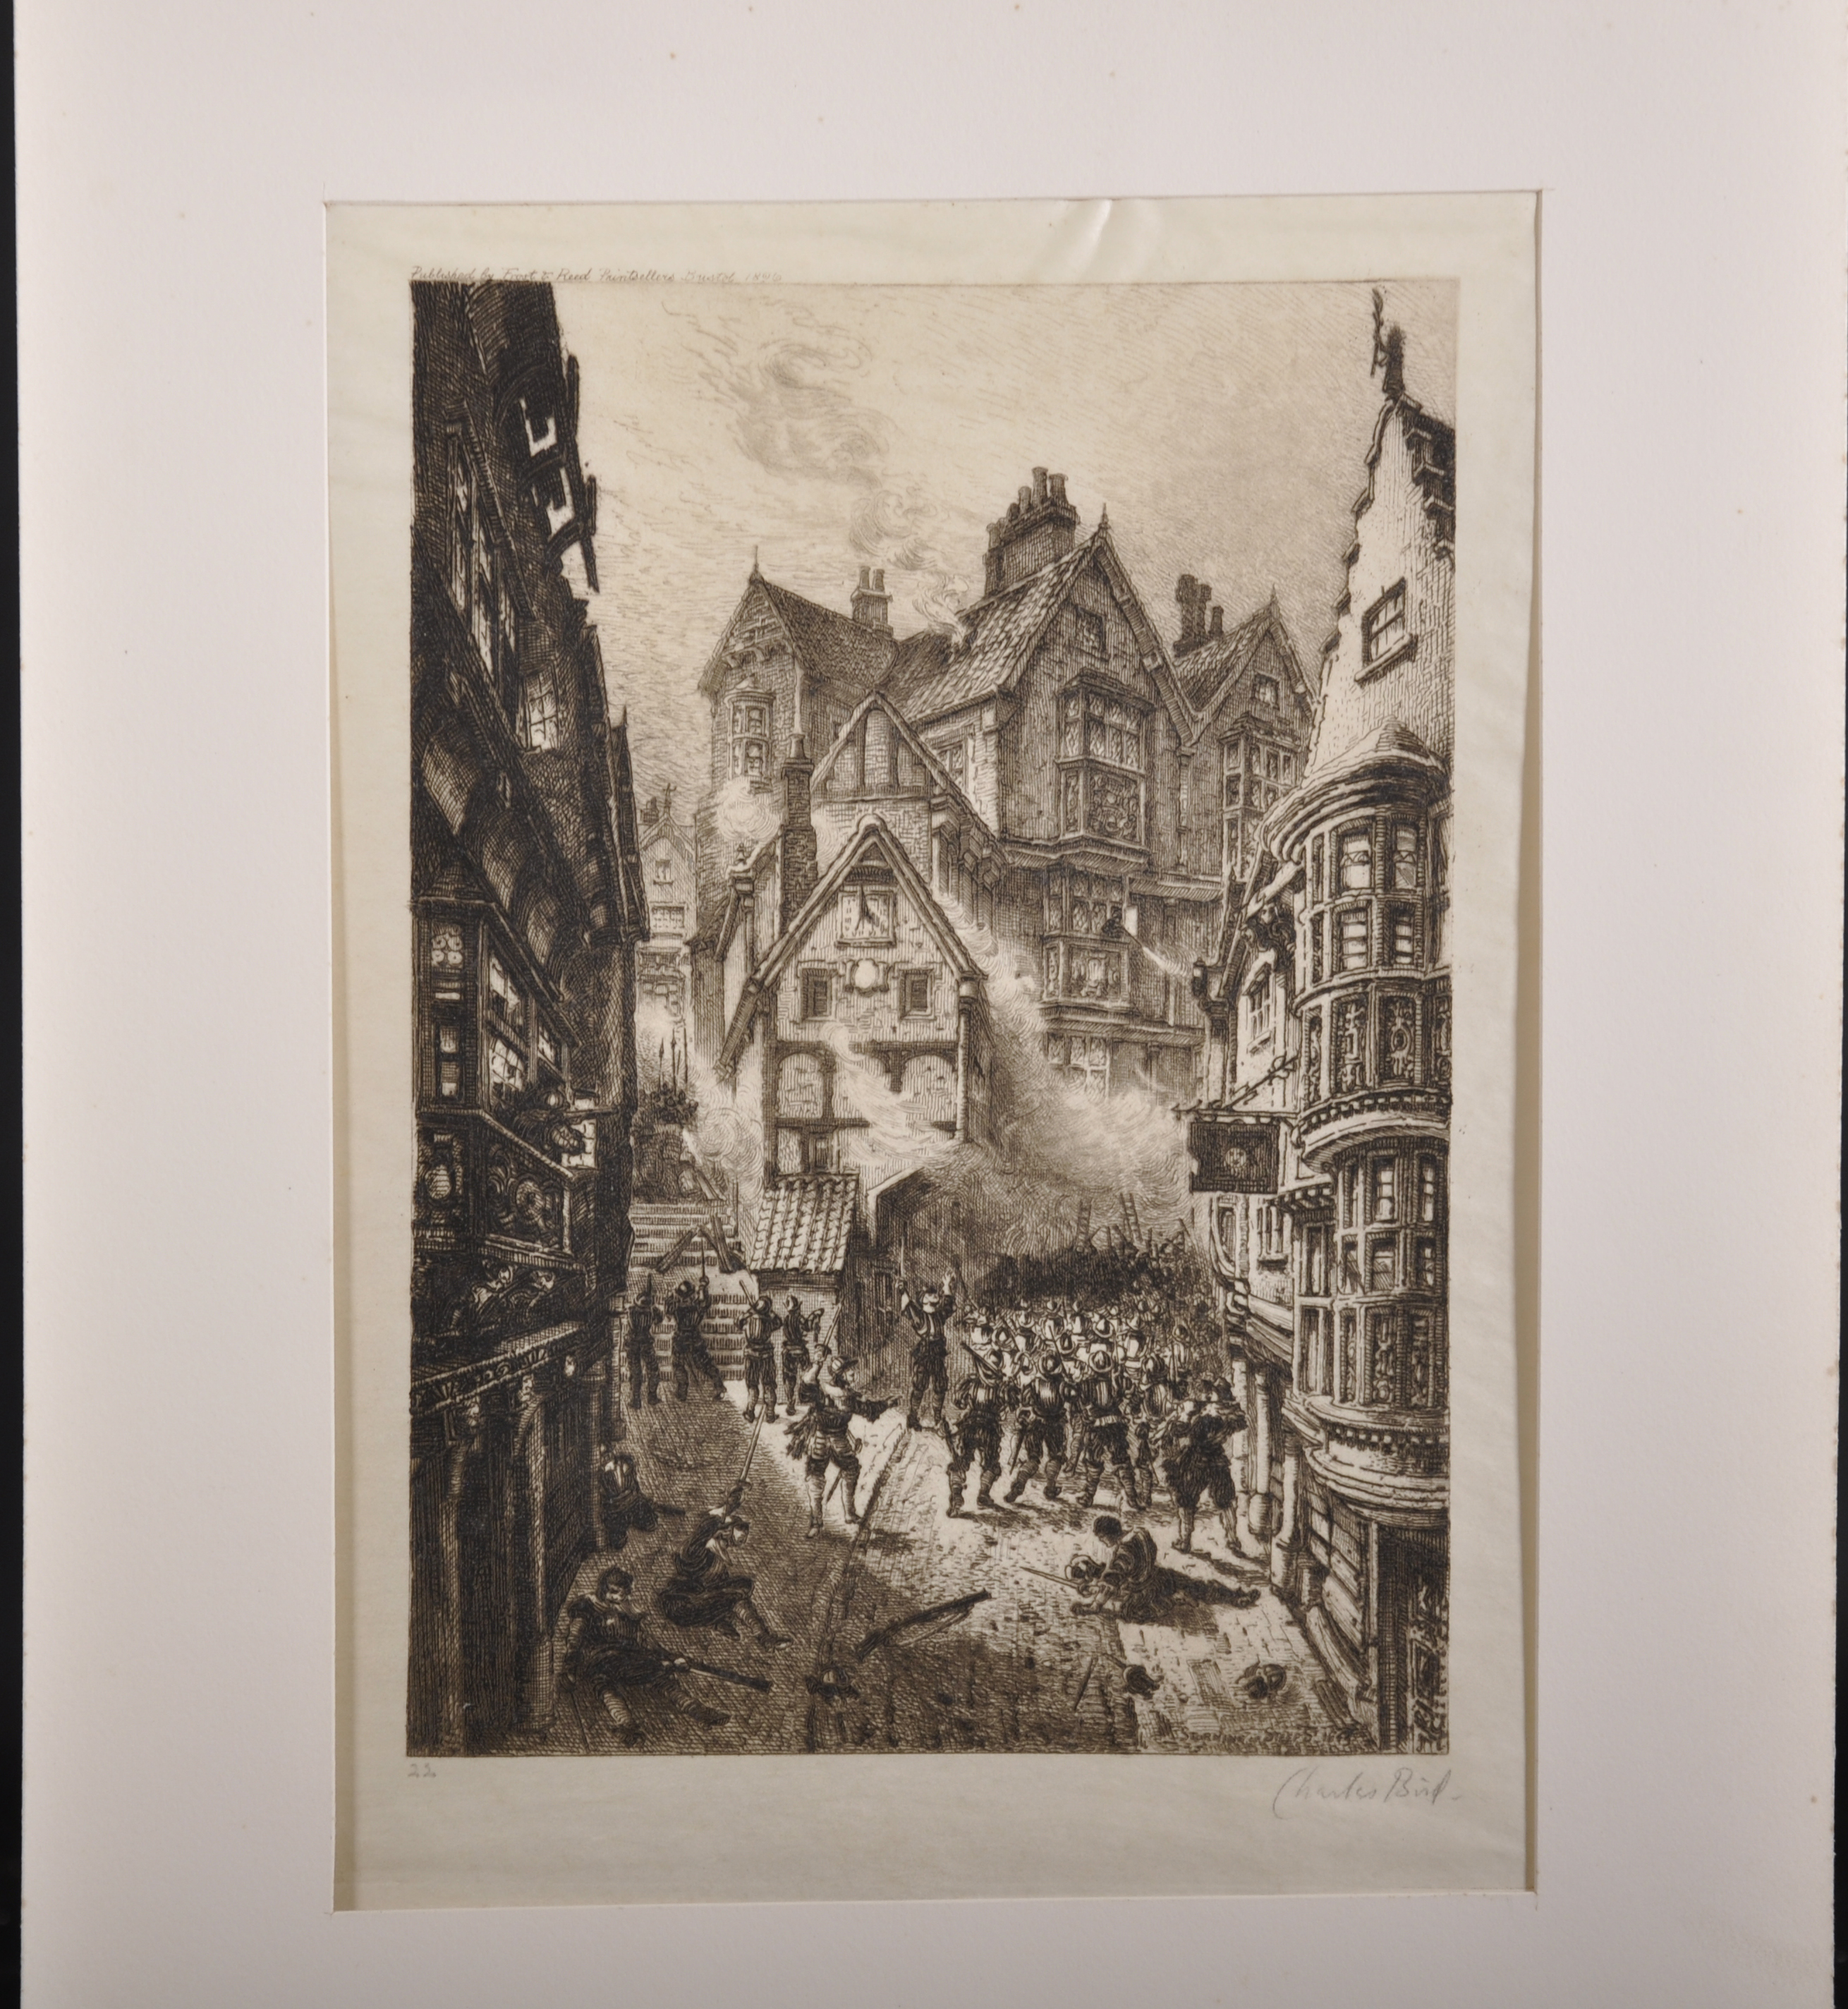 Charles Bird (act.1892-1907) British. "Historical Bristol", Etching, Signed in Pencil, 9.25" x 6. - Image 7 of 7